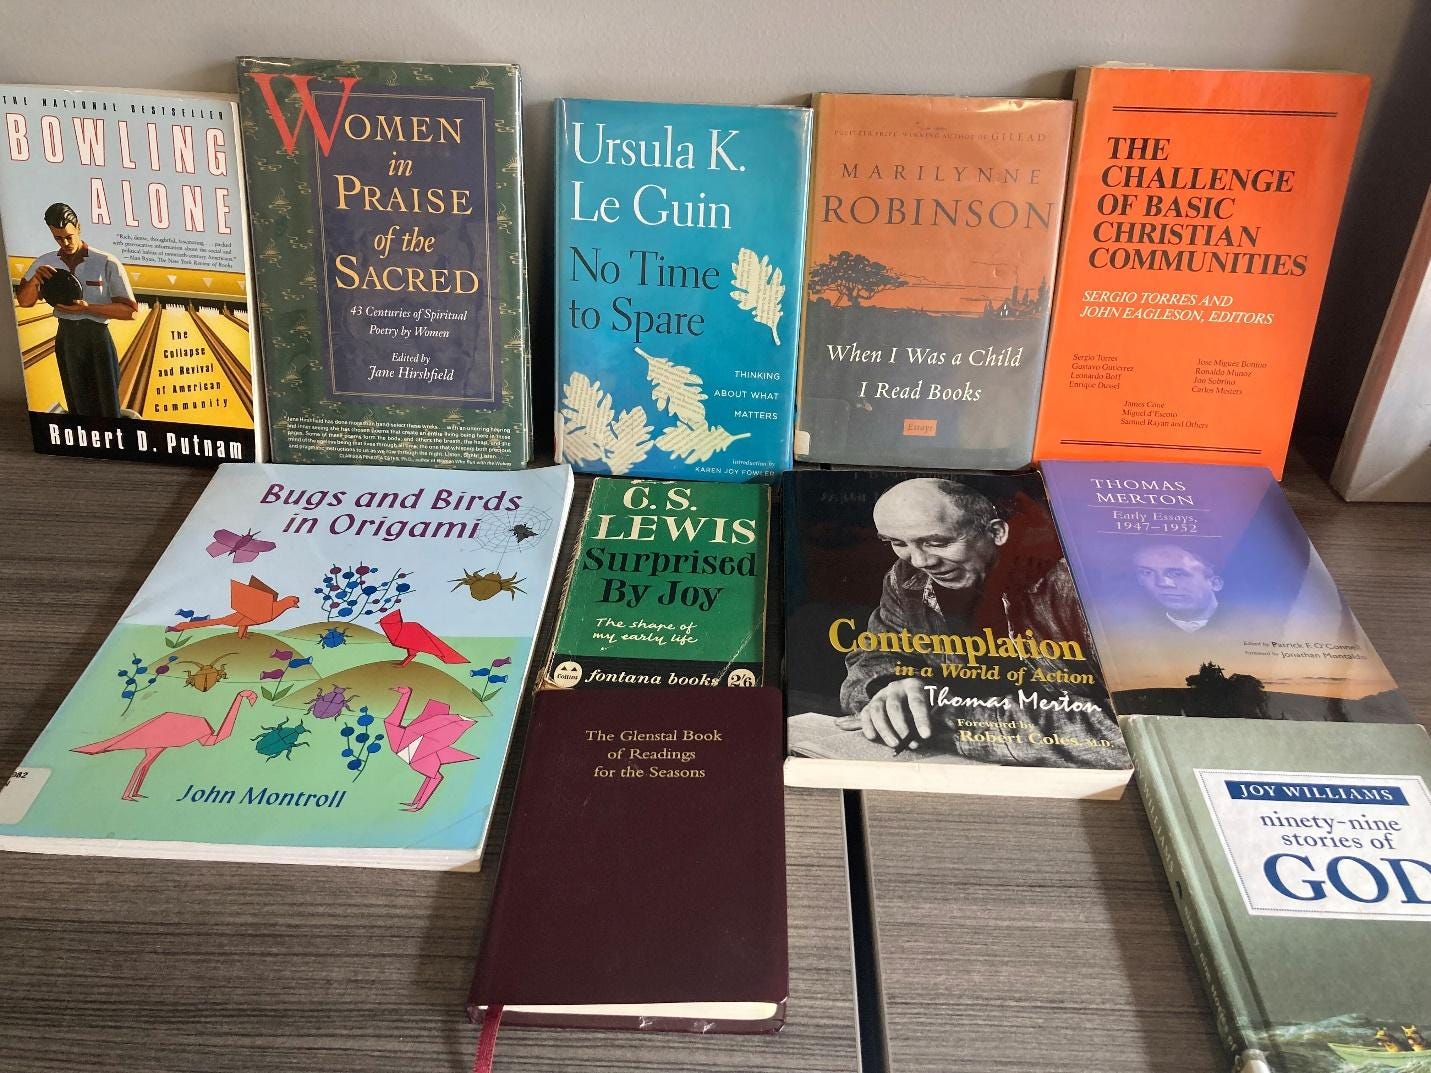 A group of books on a table

Description automatically generated